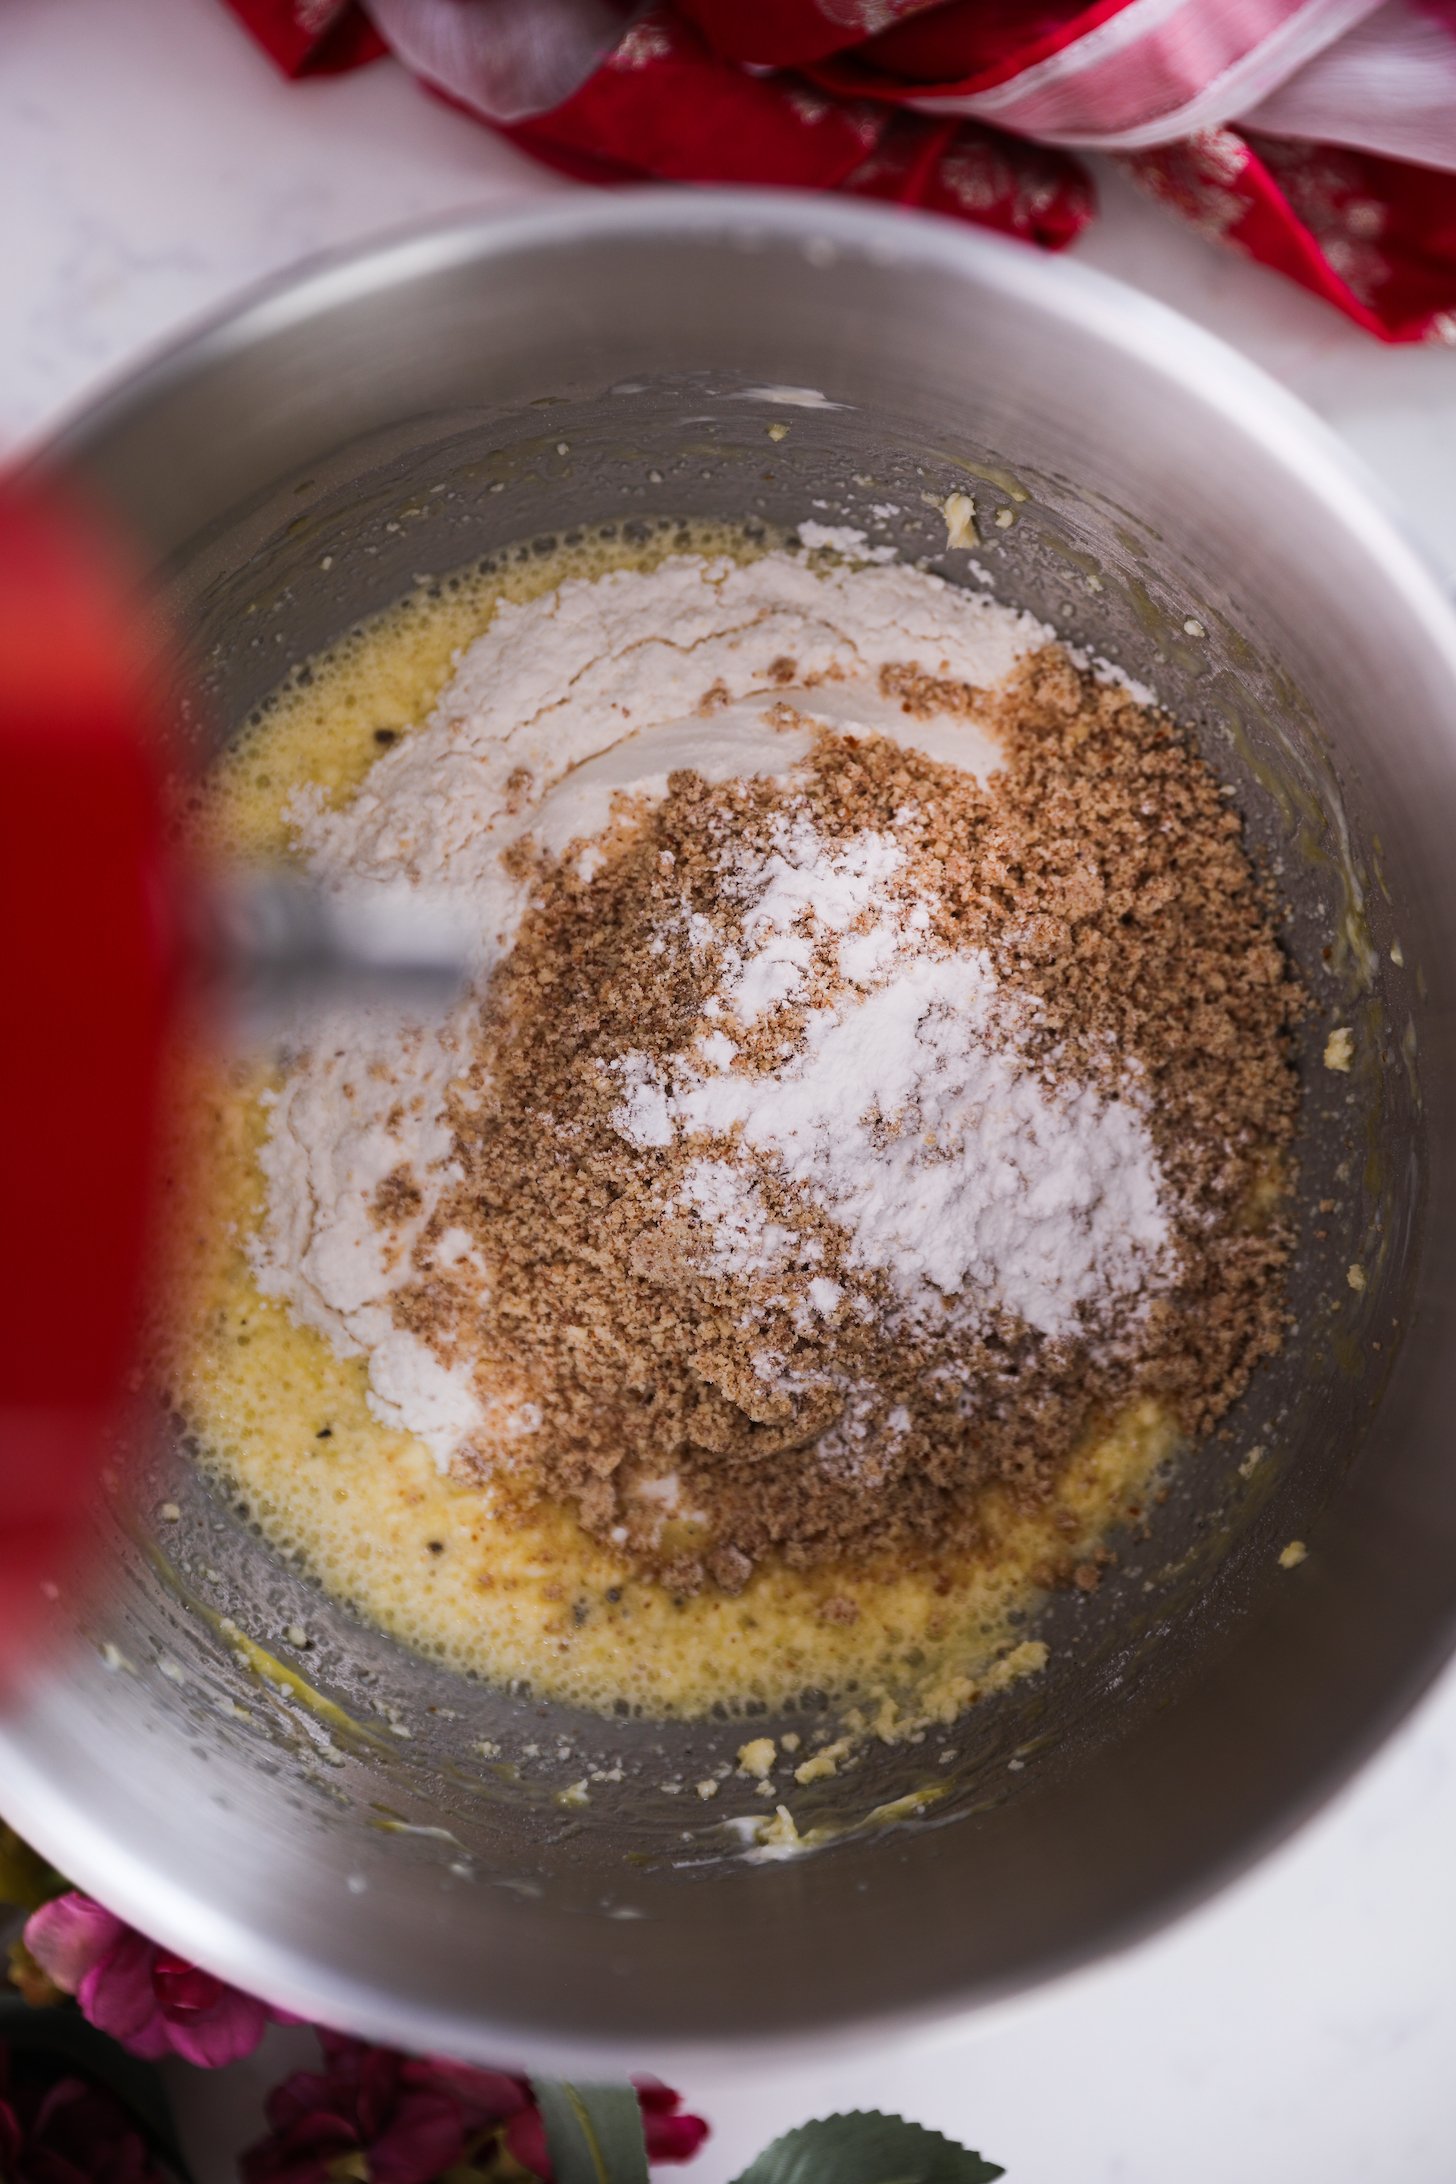 An overhead shot reveals a stand mixer bowl containing a yellow mixture topped with flour and almond meal.